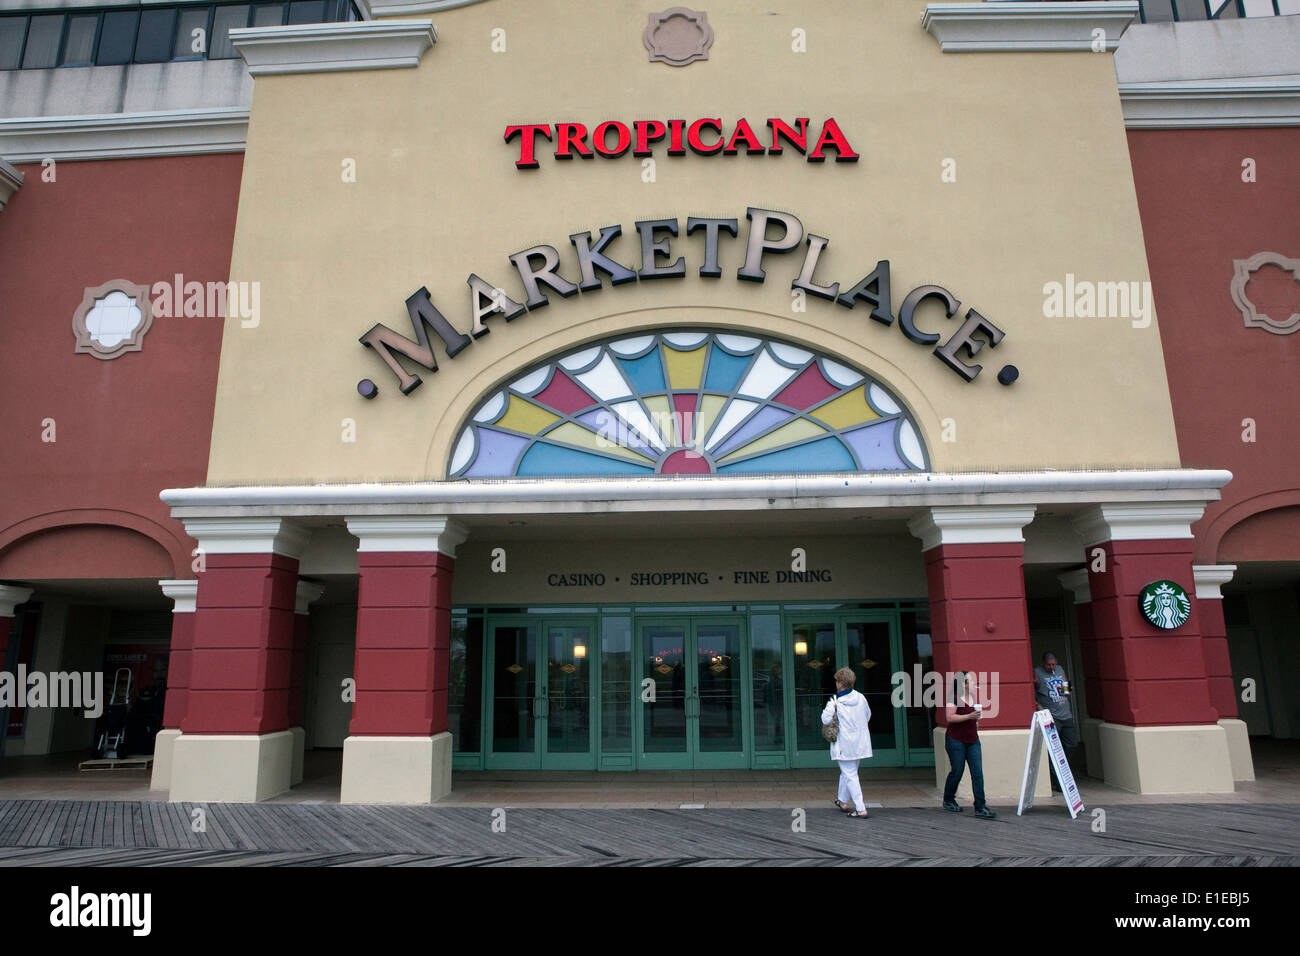 A view of the Tropicana Casino in Atlantic City, New Jersey Stock Photo